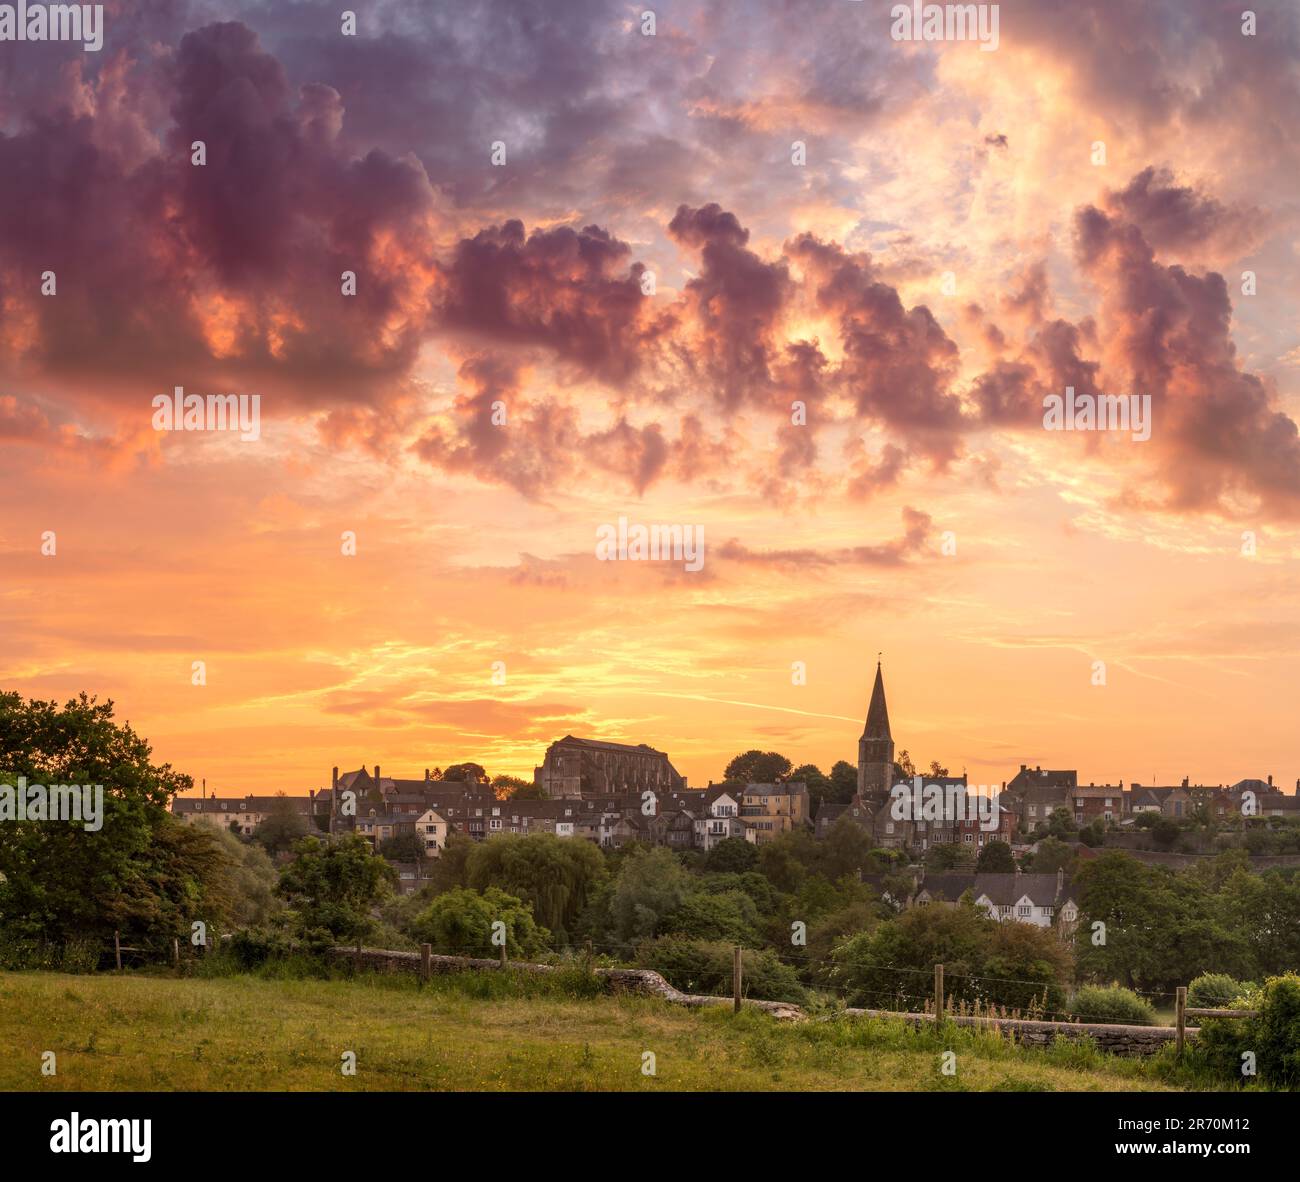 Malmesbury, Wiltshire, England - With a warning of thunder storms, the hot and humid weather is forecast to continue into this week. Before sunrise th Stock Photo